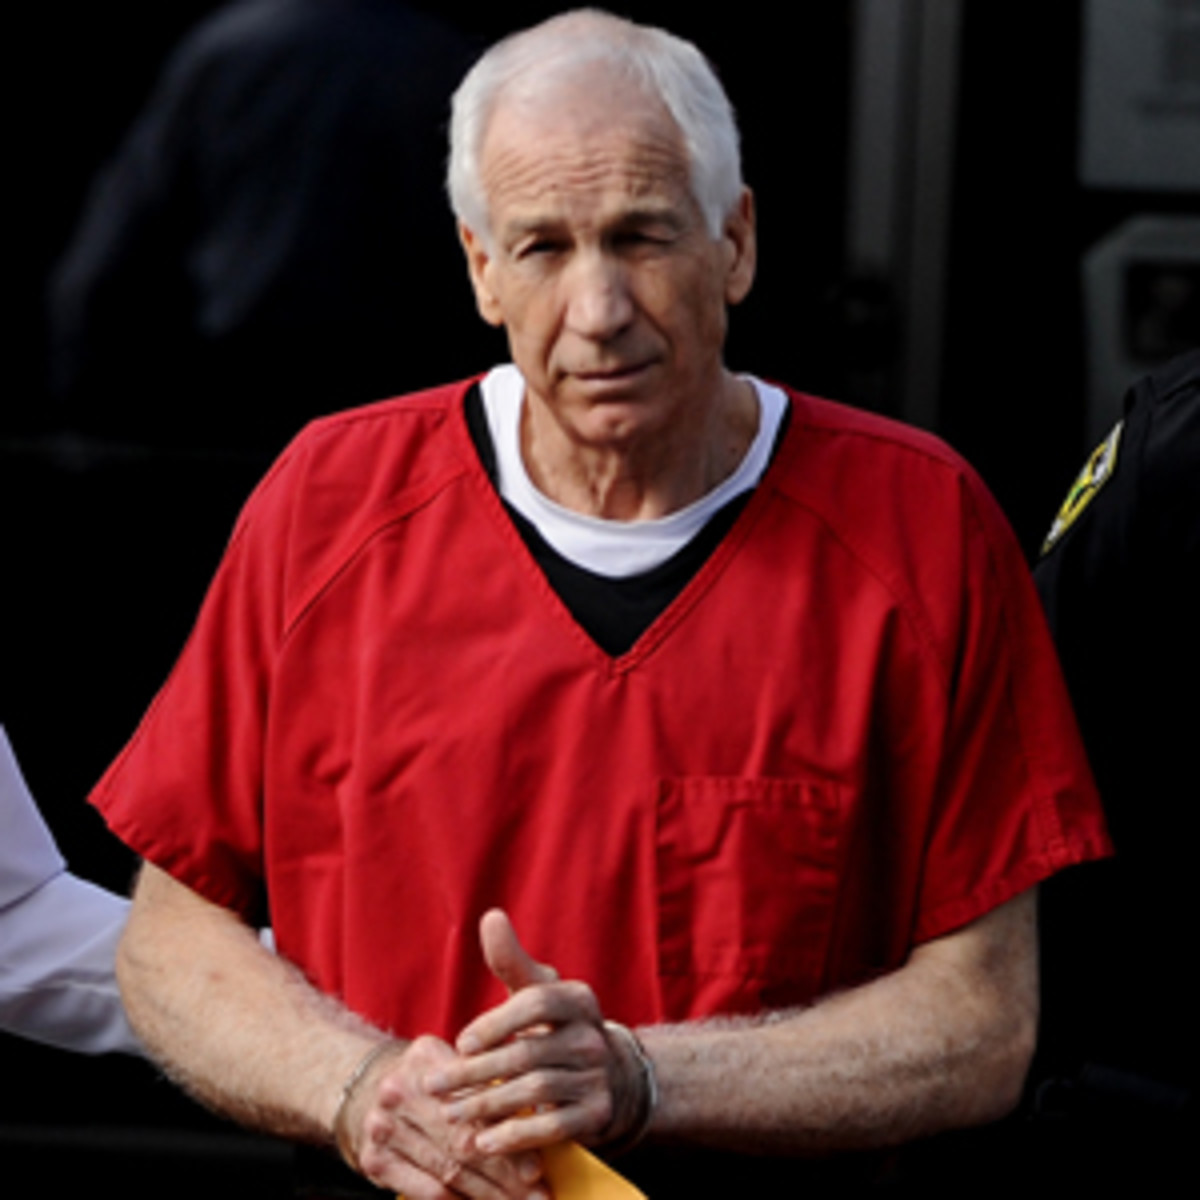 Jerry Sandusky was convicted on 45 of 48 counts of child sex abuse in June of 2012. (Patrick Smith/Getty Images)